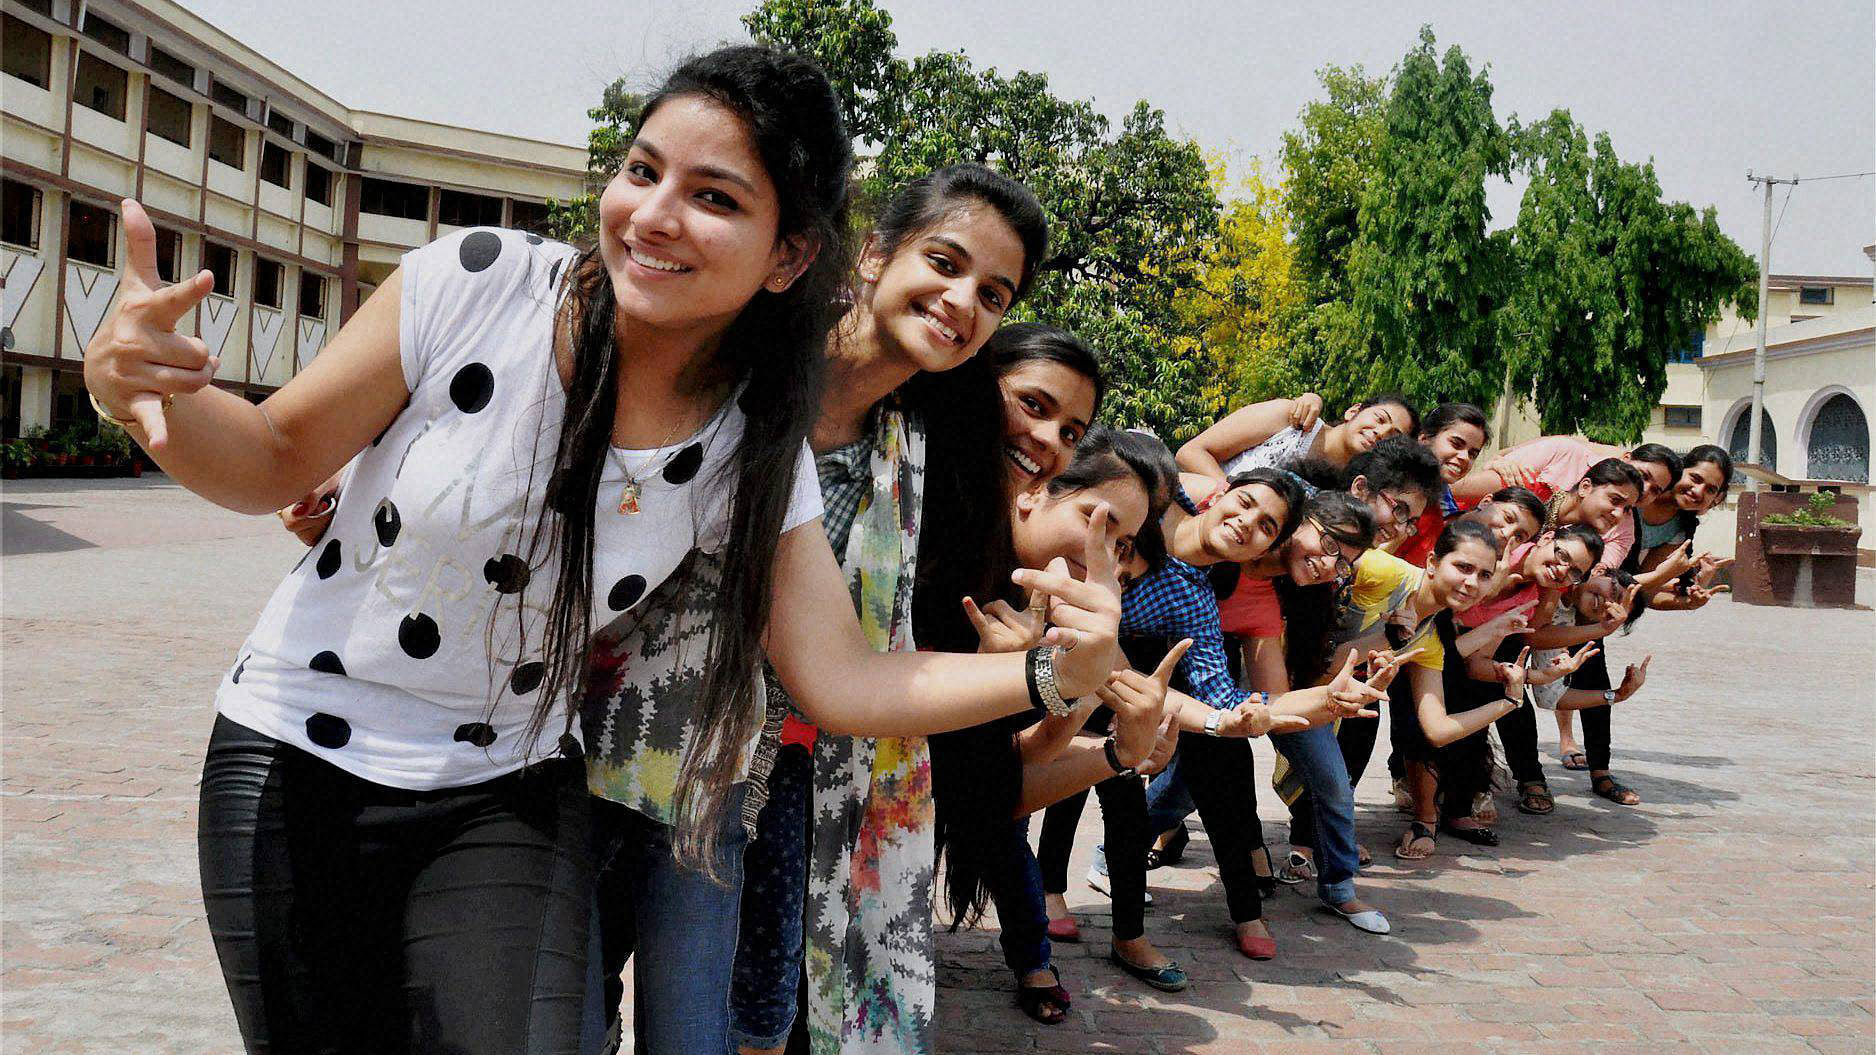 Students celeberate their success at a school after CBSE announced its 12th class results in Moradabad. (Photo: PTI)